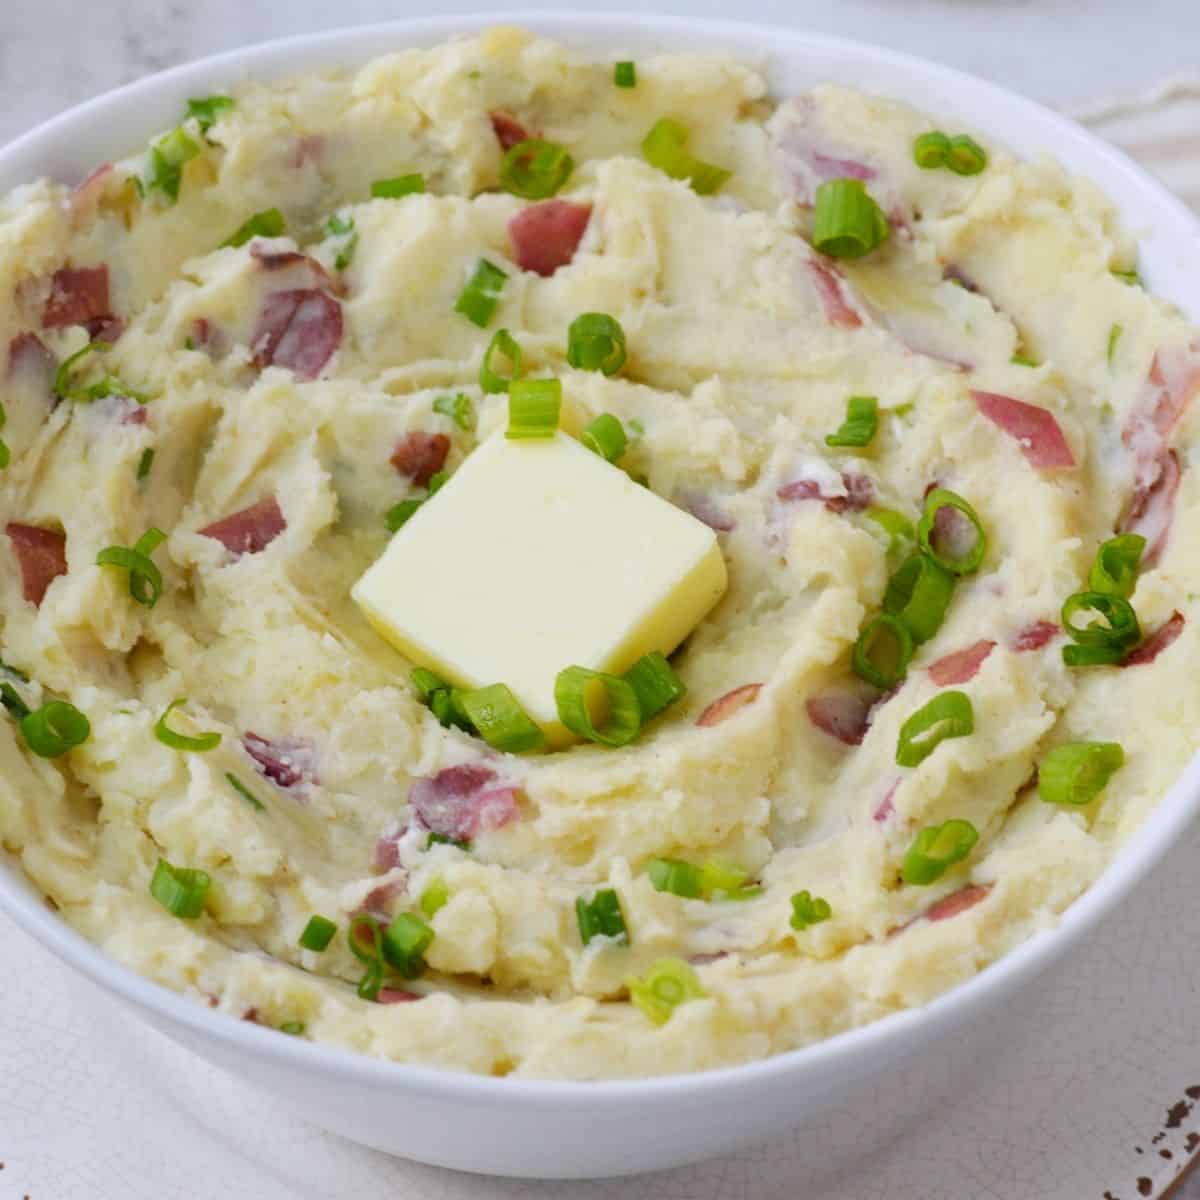 White bowl filled with a swirl of creamy roasted garlic red skin mashed potatoes garnished with green onion and a square of butter.